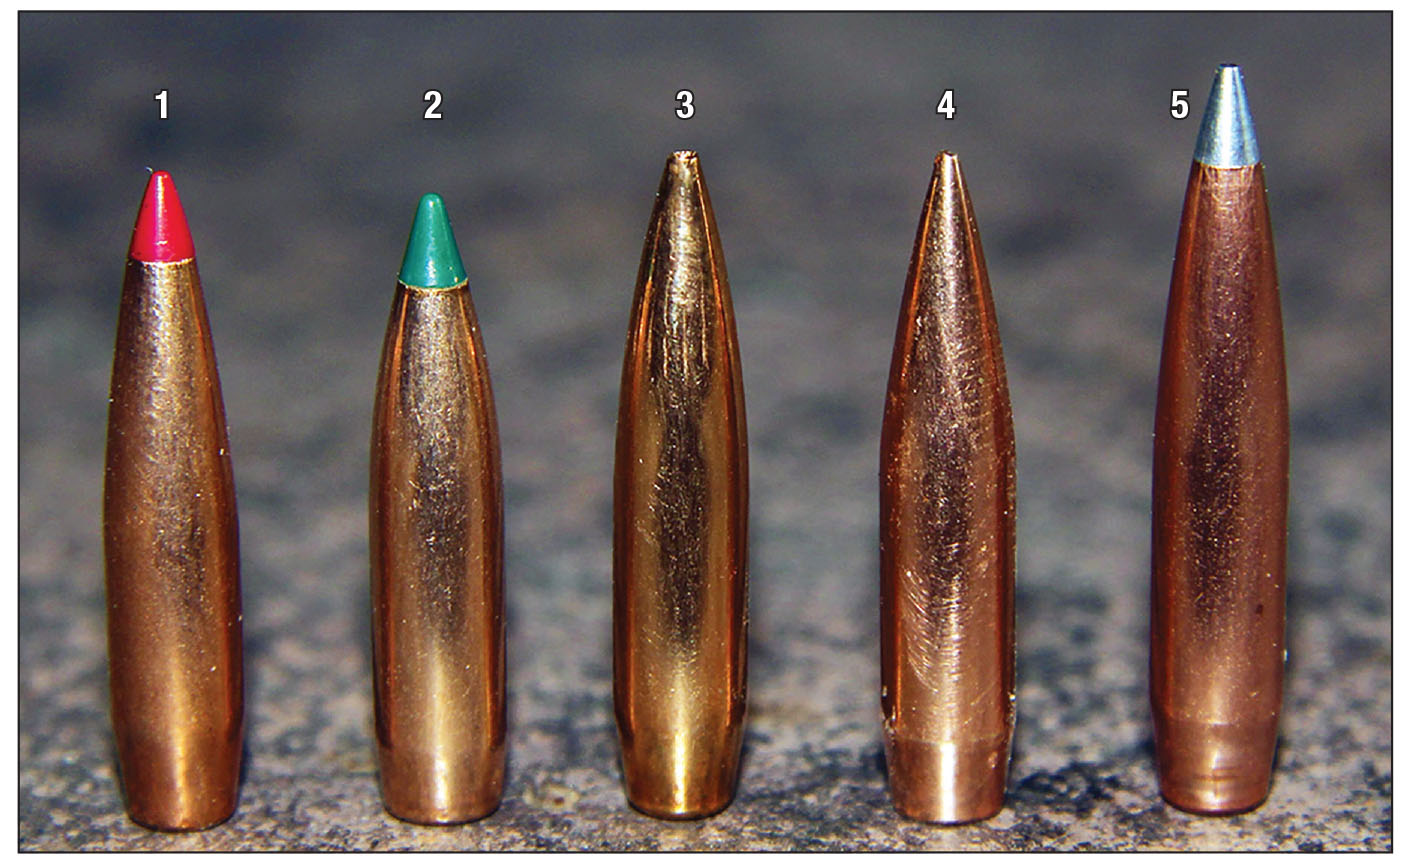 Bullets used for load testing included a (1) Hornady 75-grain ELD Match, (2) Sierra 77-grain Tipped MatchKing, (3) Berger 82-grain BT Target, (4) Nosler’s 85-grain RDF and a (5) Hornady 90-grain A-Tip.